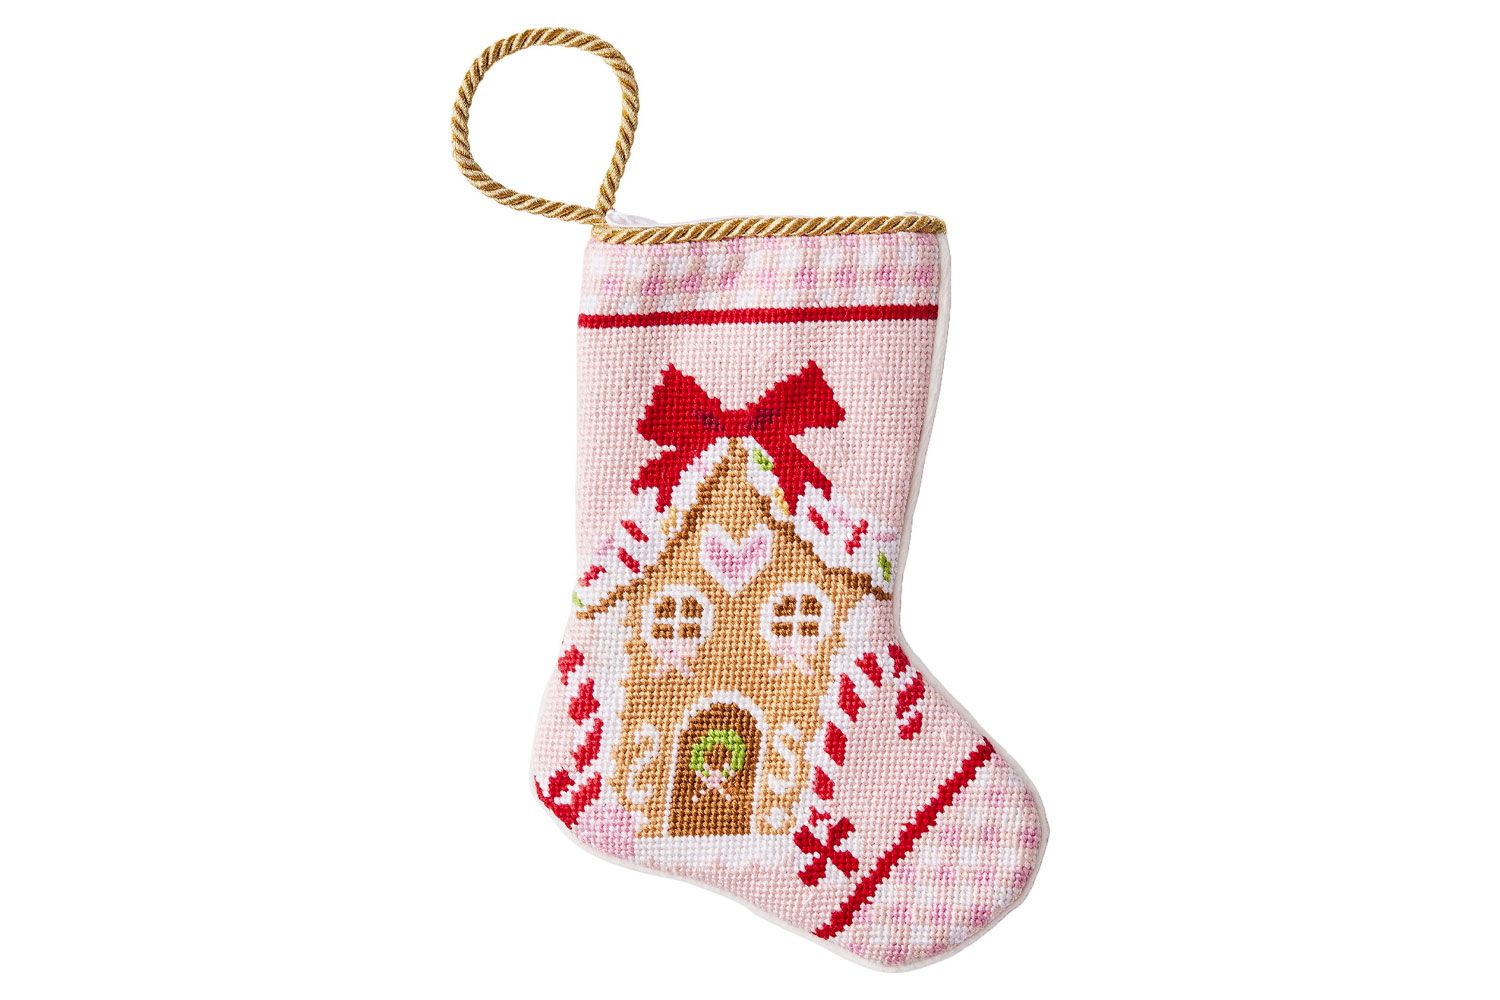 BAUBLE STOCKINGS Mini Gingerbread Magic Stocking By Courtney Whitmore Of Pizzazzerie